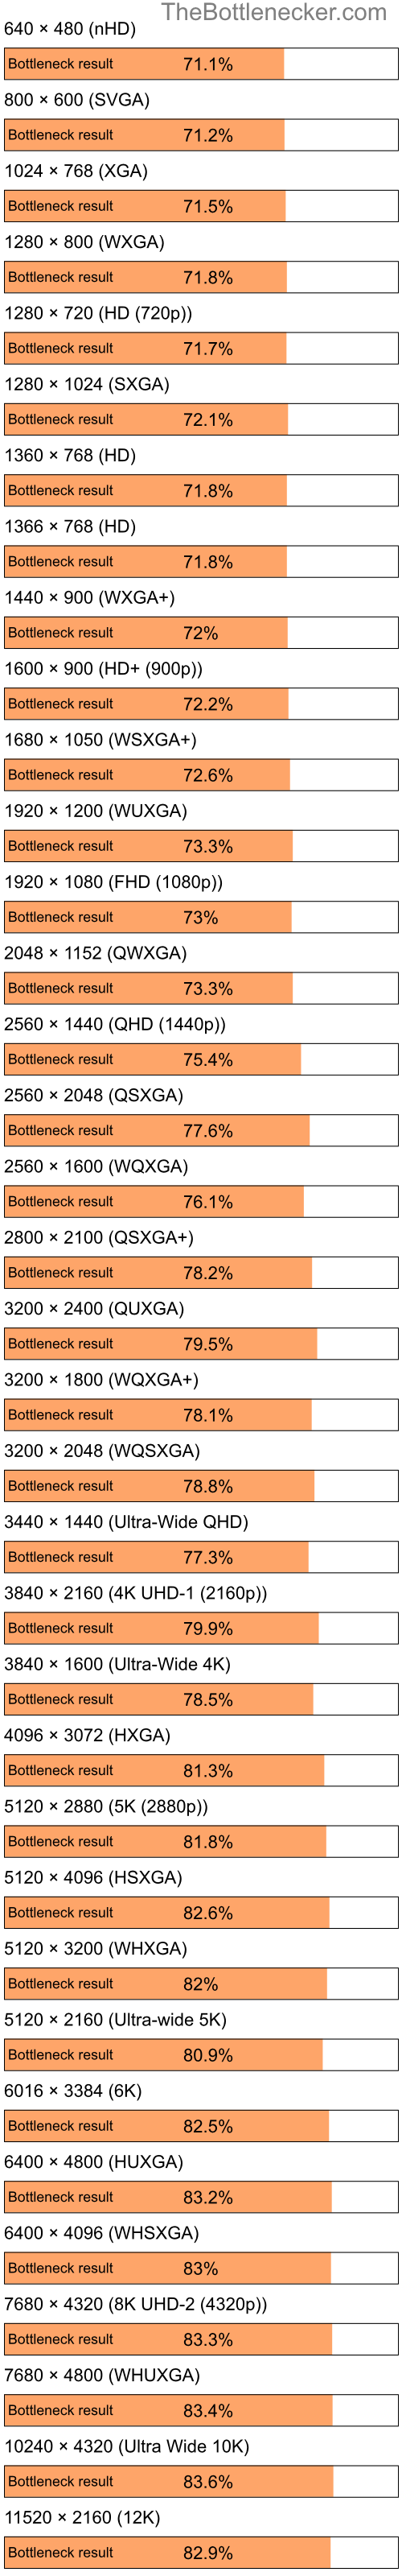 Bottleneck results by resolution for Intel Atom Z520 and AMD Radeon 9800 PRO in7 Days to Die